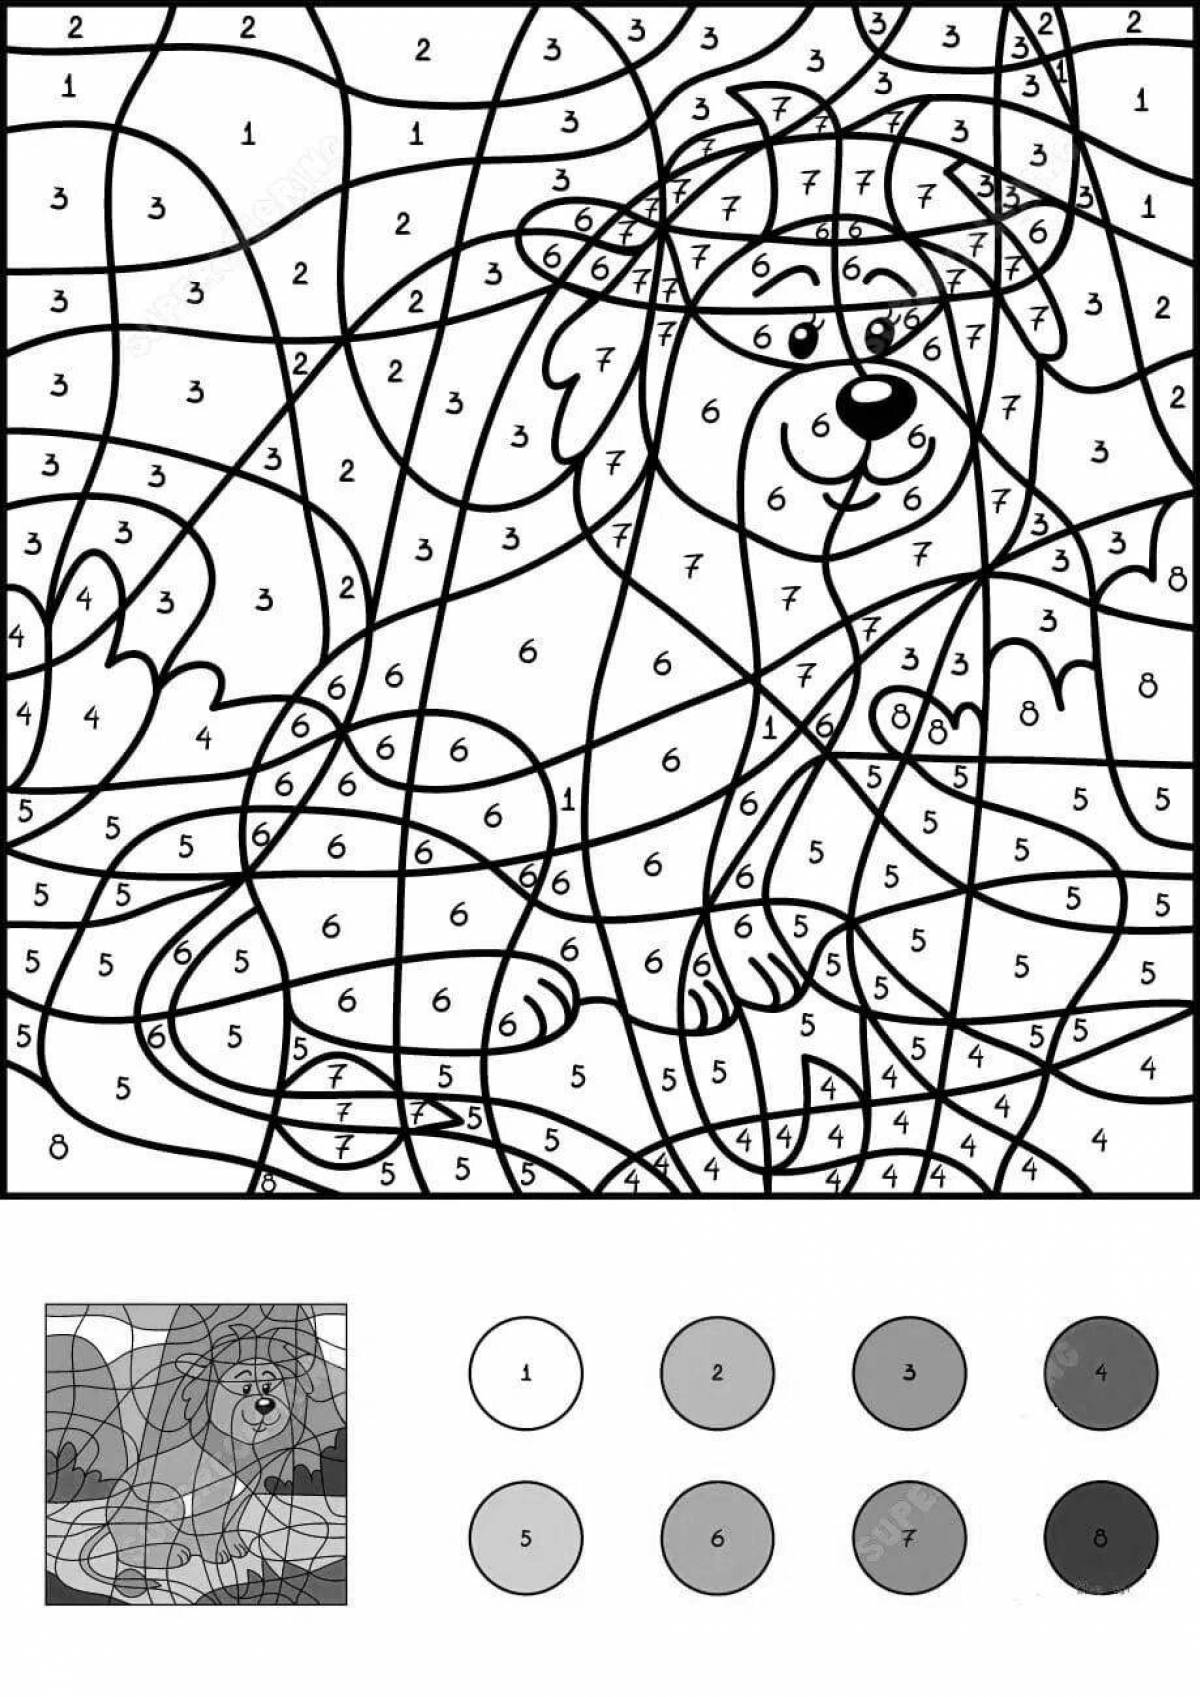 Witty animal coloring by numbers